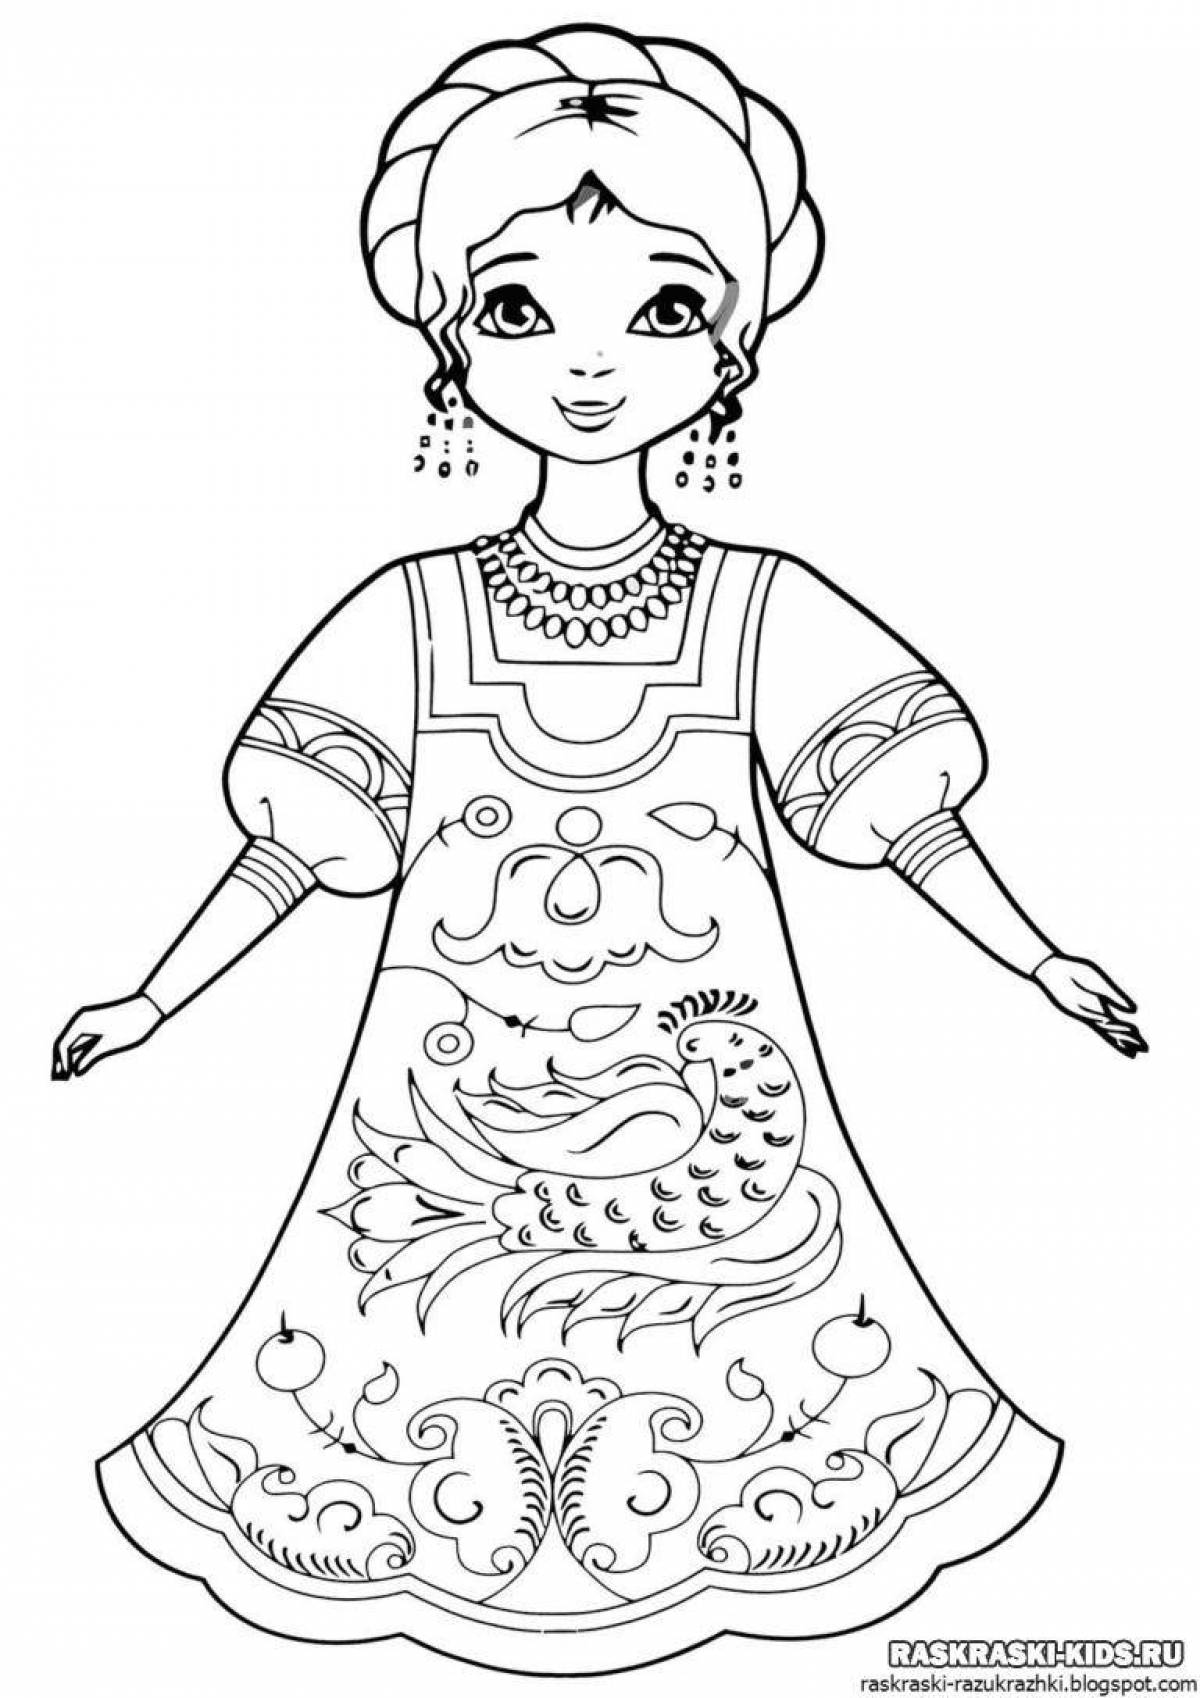 Coloring Russian costume for children